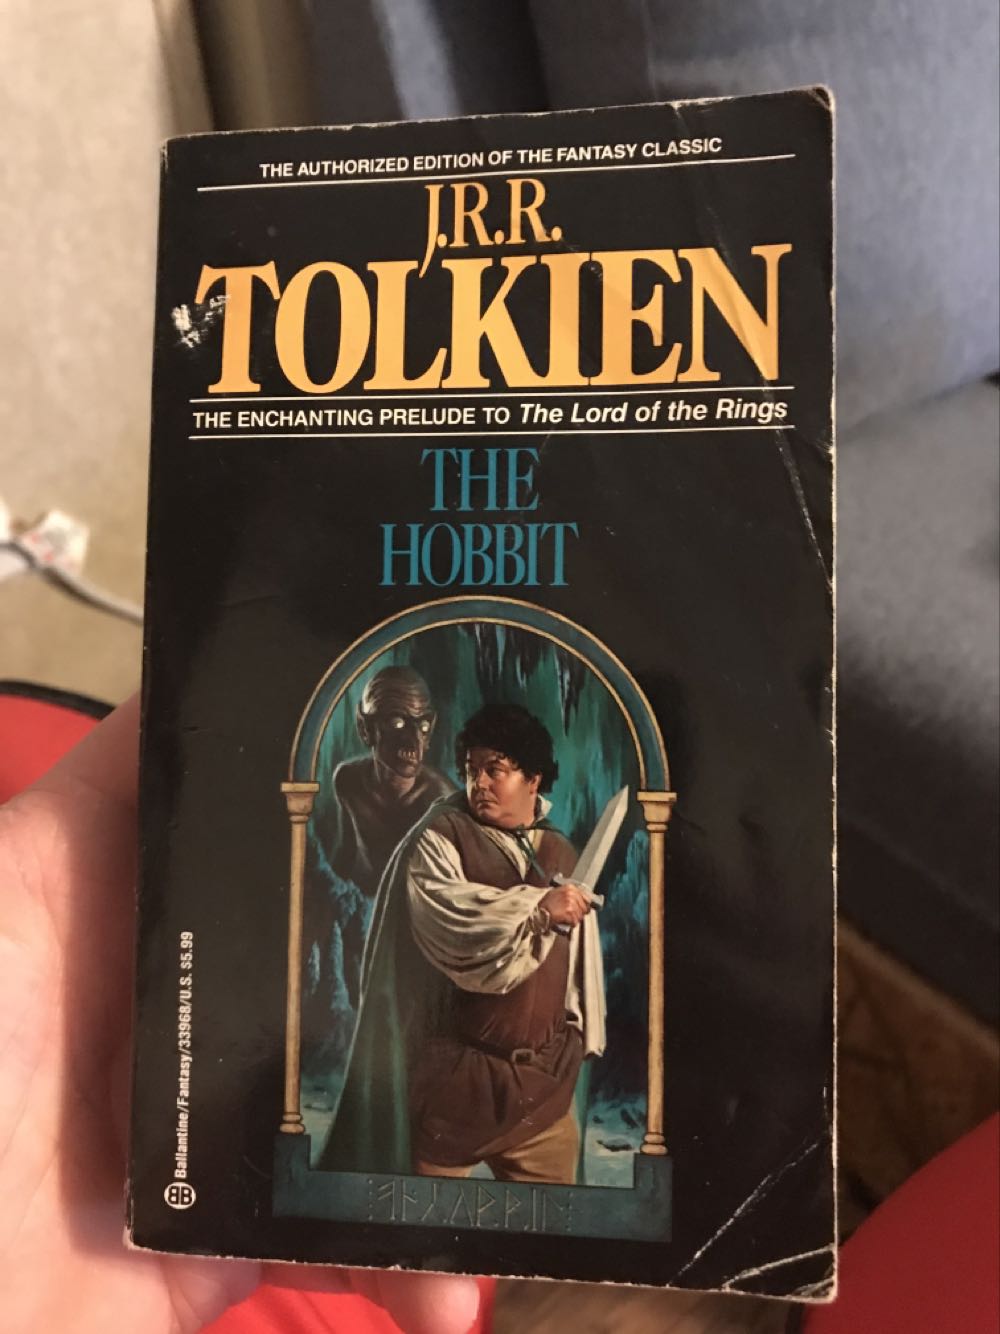 The Hobbit - J.R.R. Tolkien (Del Rey - Paperback) book collectible [Barcode 9780345339683] - Main Image 3